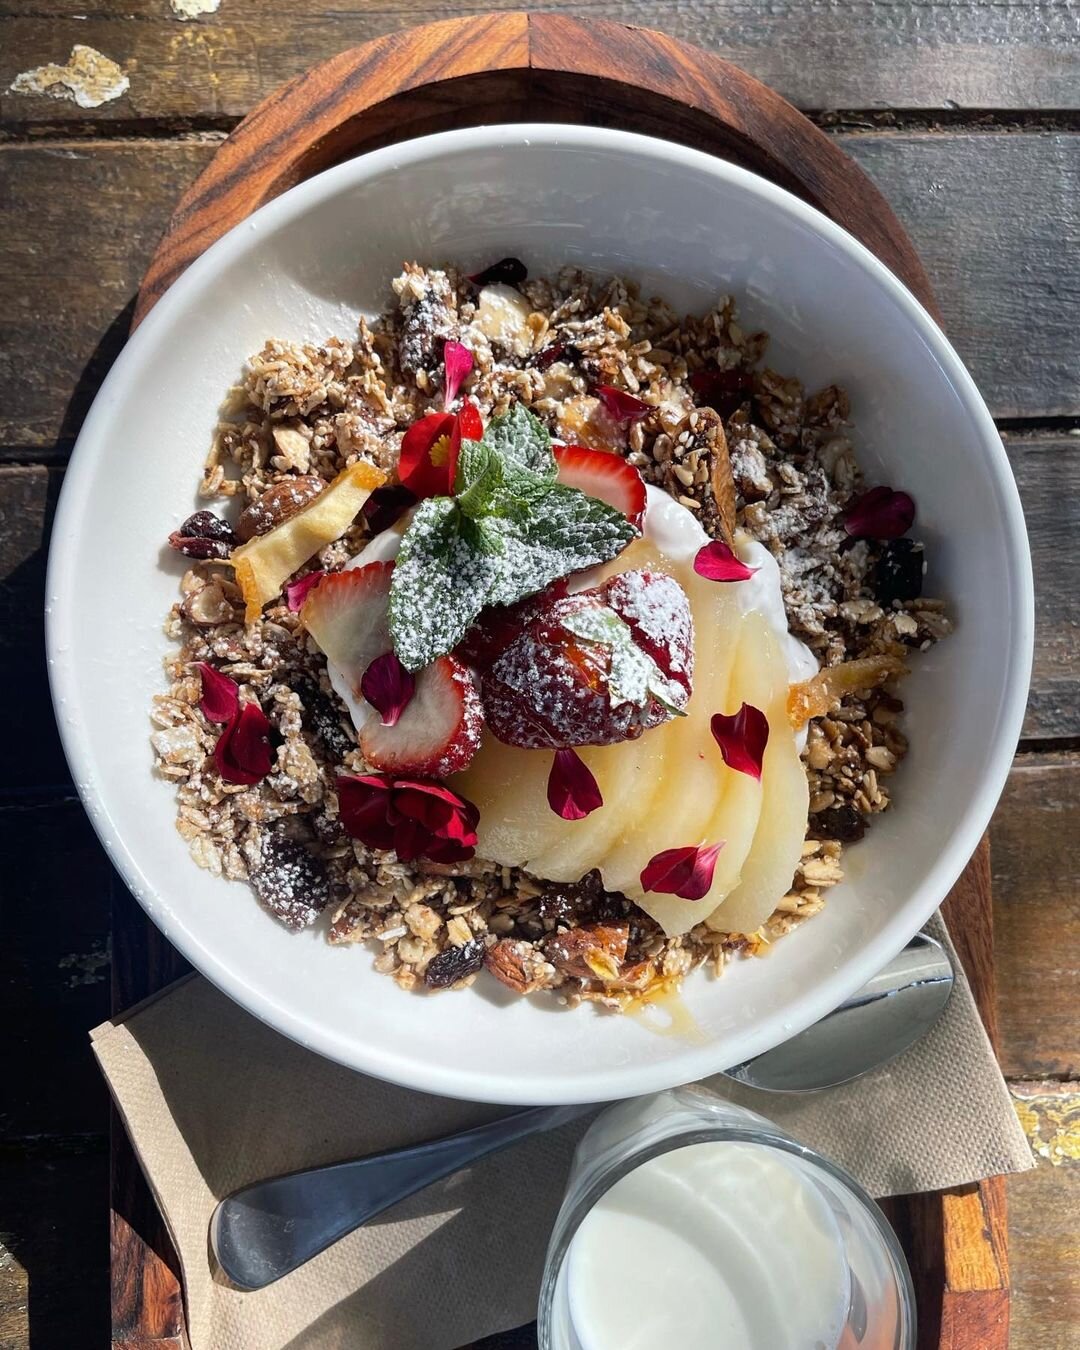  Pasture &amp; Co Gold Coast. This guide to the best cafes in Gold Coast Australia includes the best breakfast spots in Gold Coast and the best vegan cafes in Gold Coast. Find the best cafes in Burleigh Head, Palm Beach, and more of the best places t